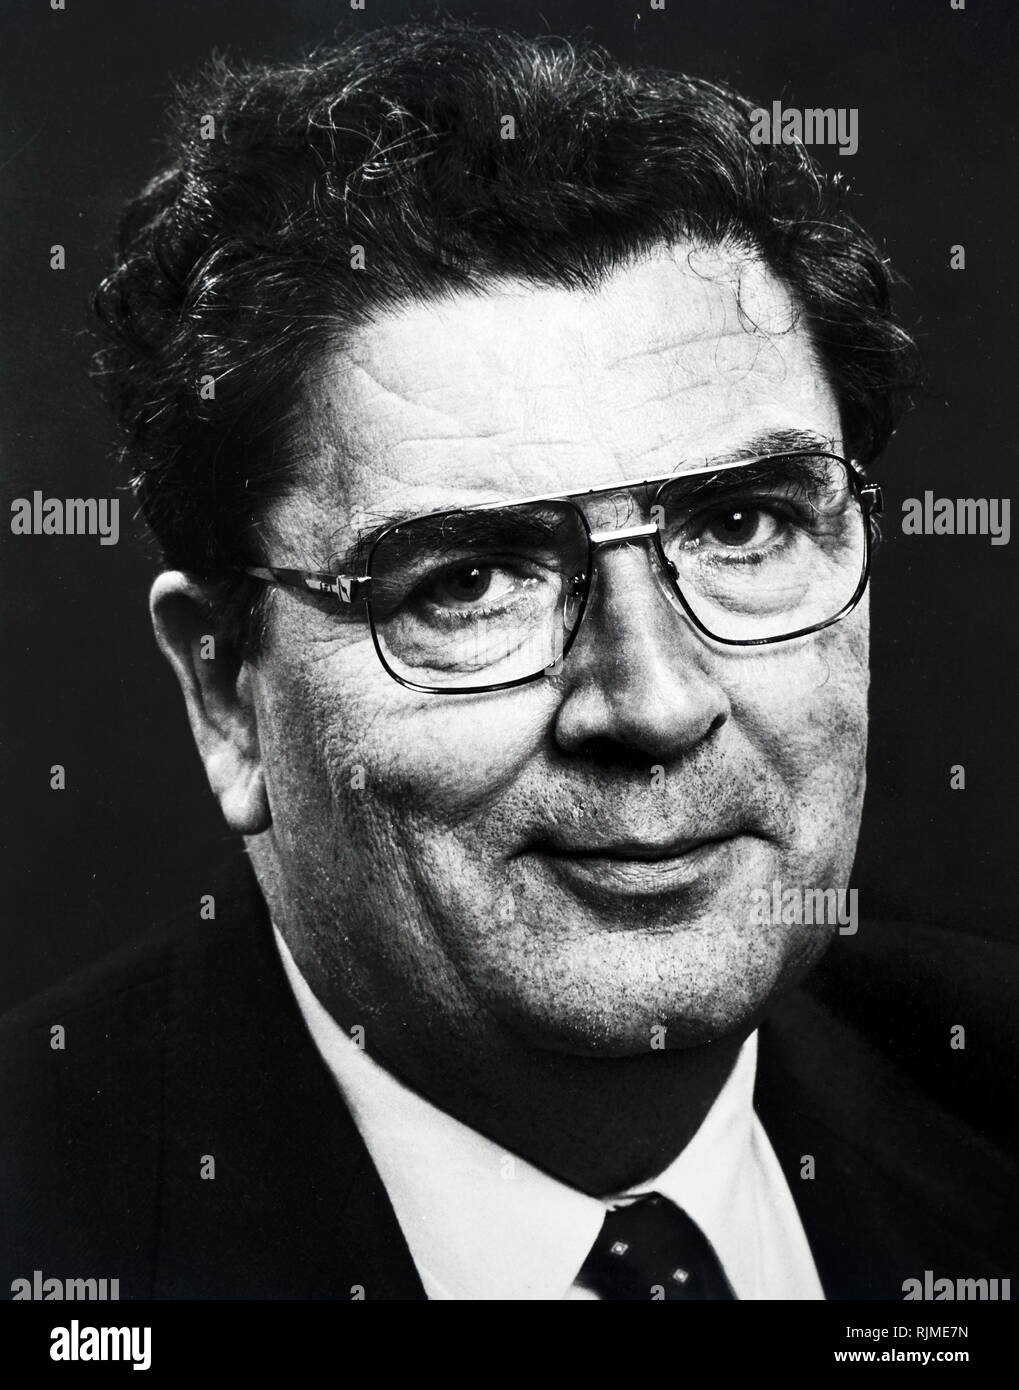 John Hume, (born 18 January 1937); Irish former politician from Derry, Northern Ireland. He was a founding member of the Social Democratic and Labour Party, and was co-recipient of the 1998 Nobel Peace Prize, Stock Photo